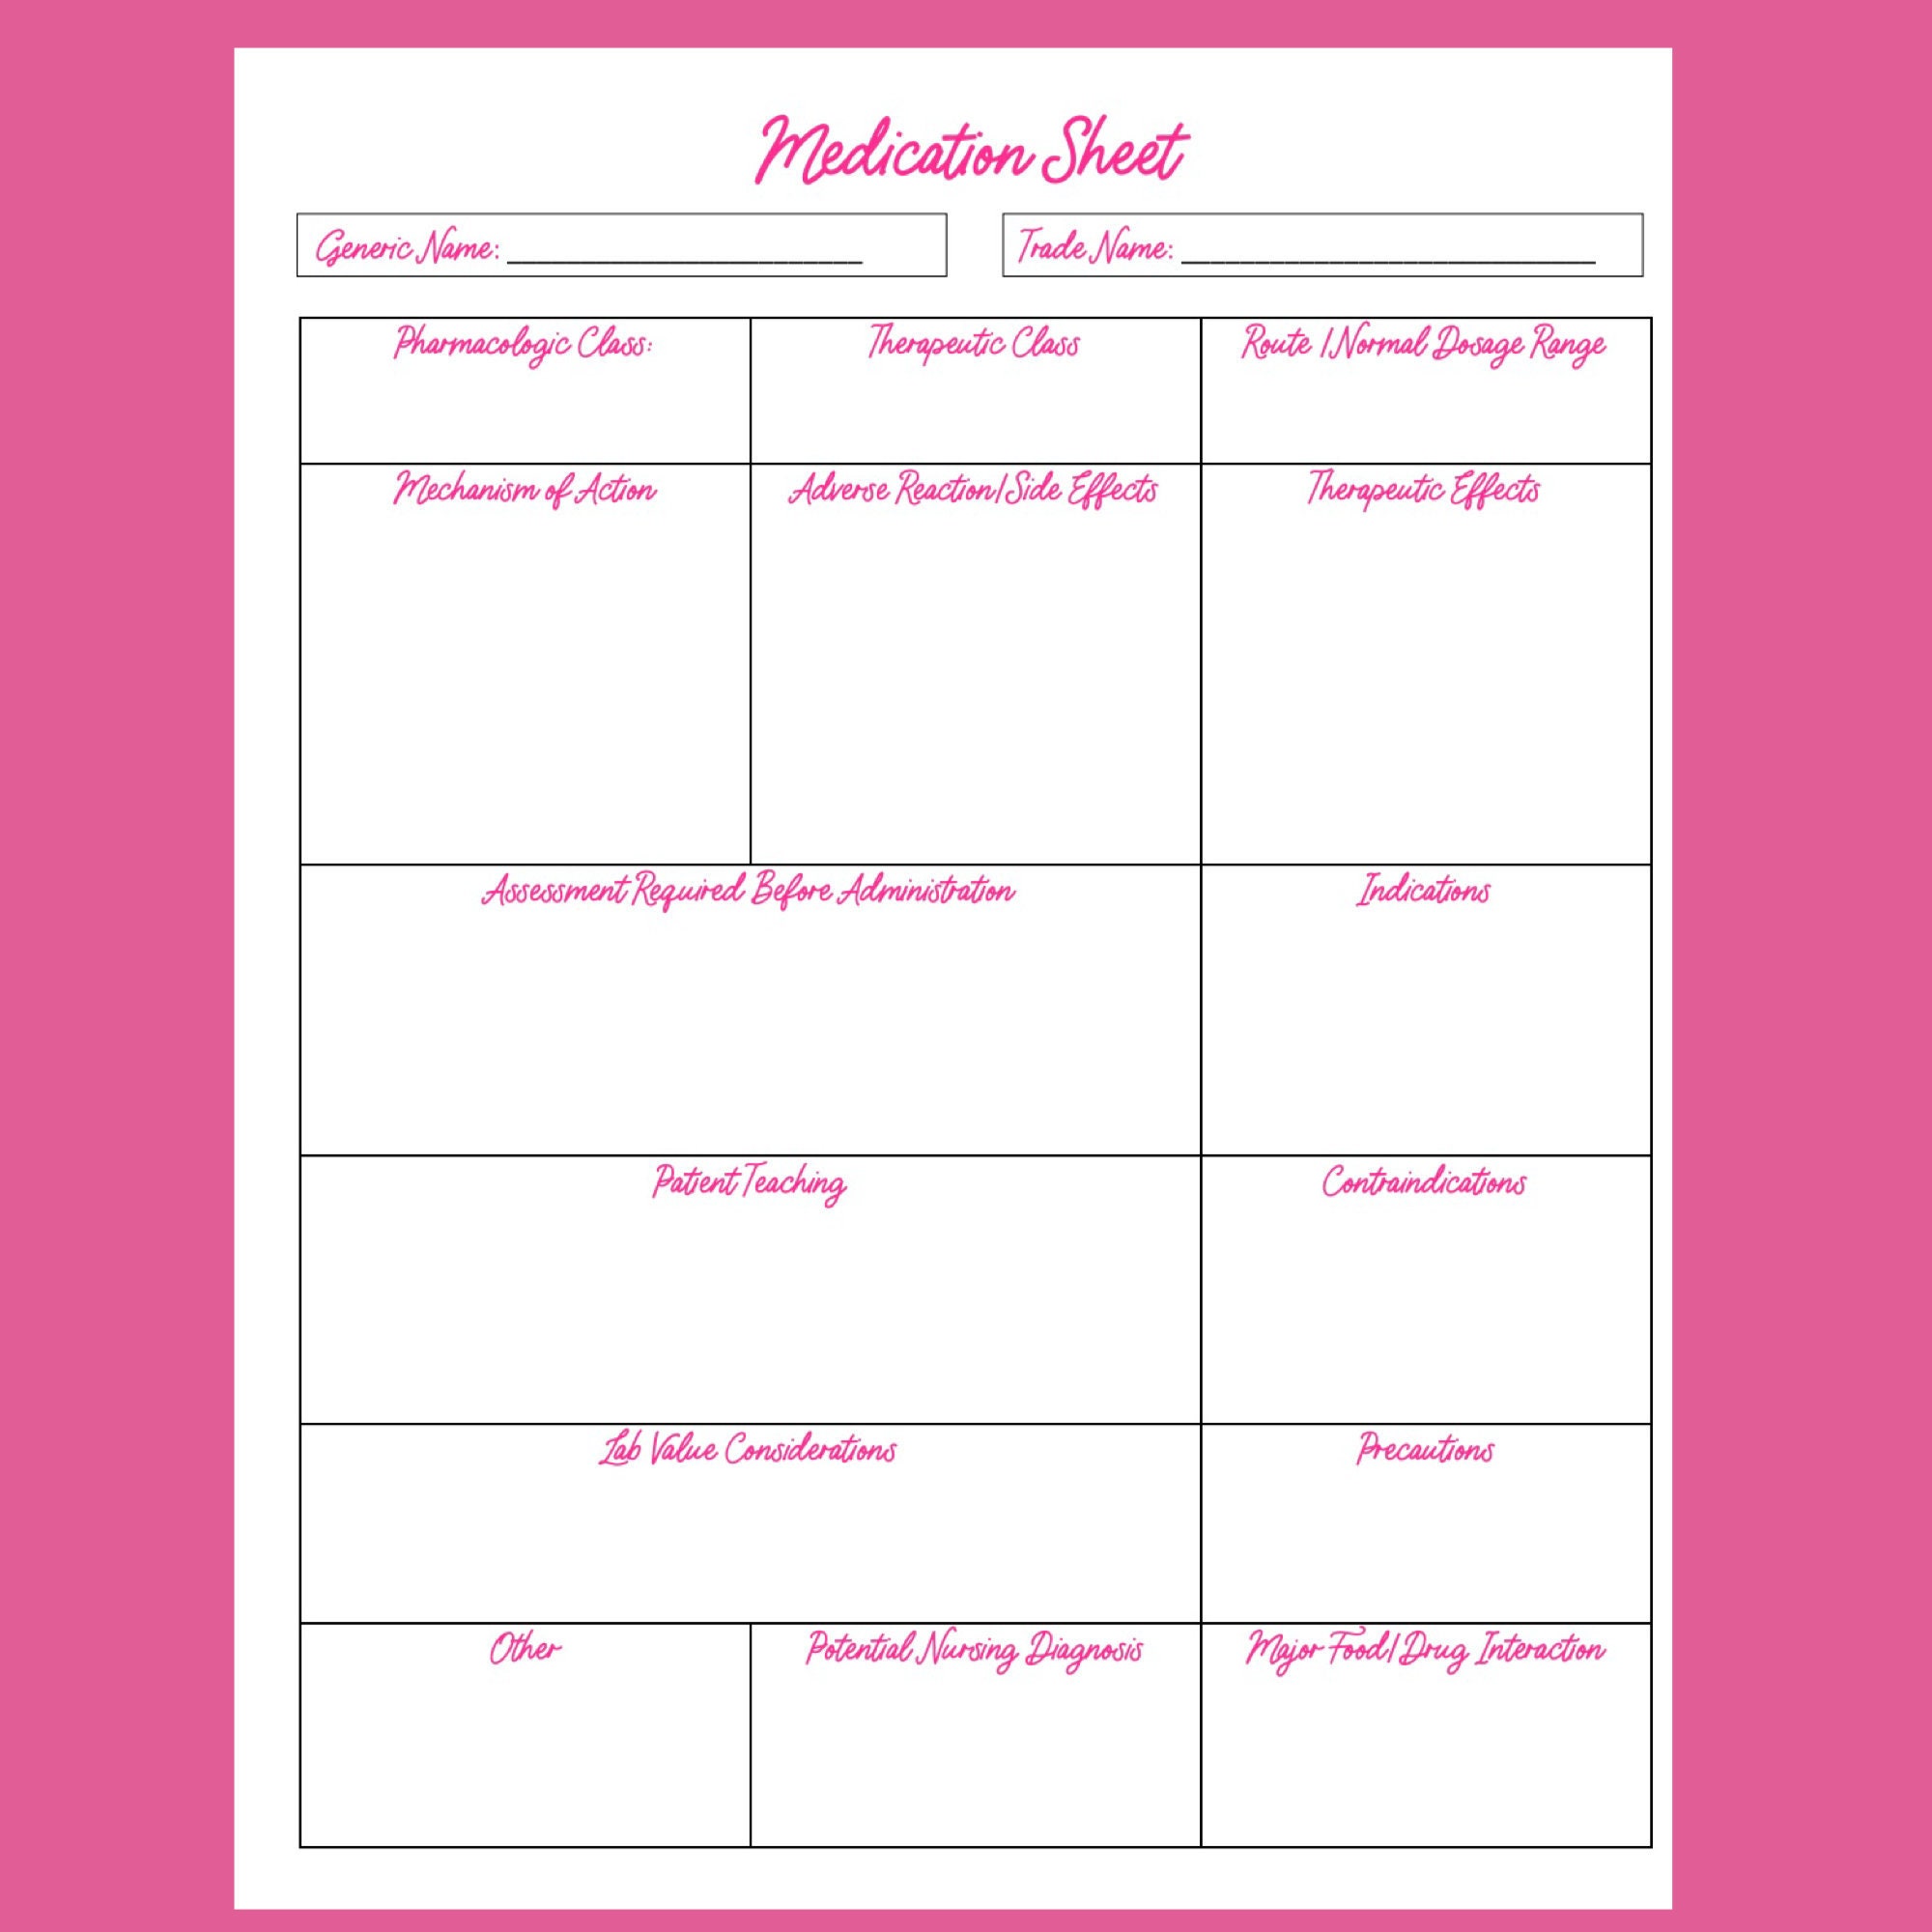 Medication Sheet Template Pertaining To Medication Card Template